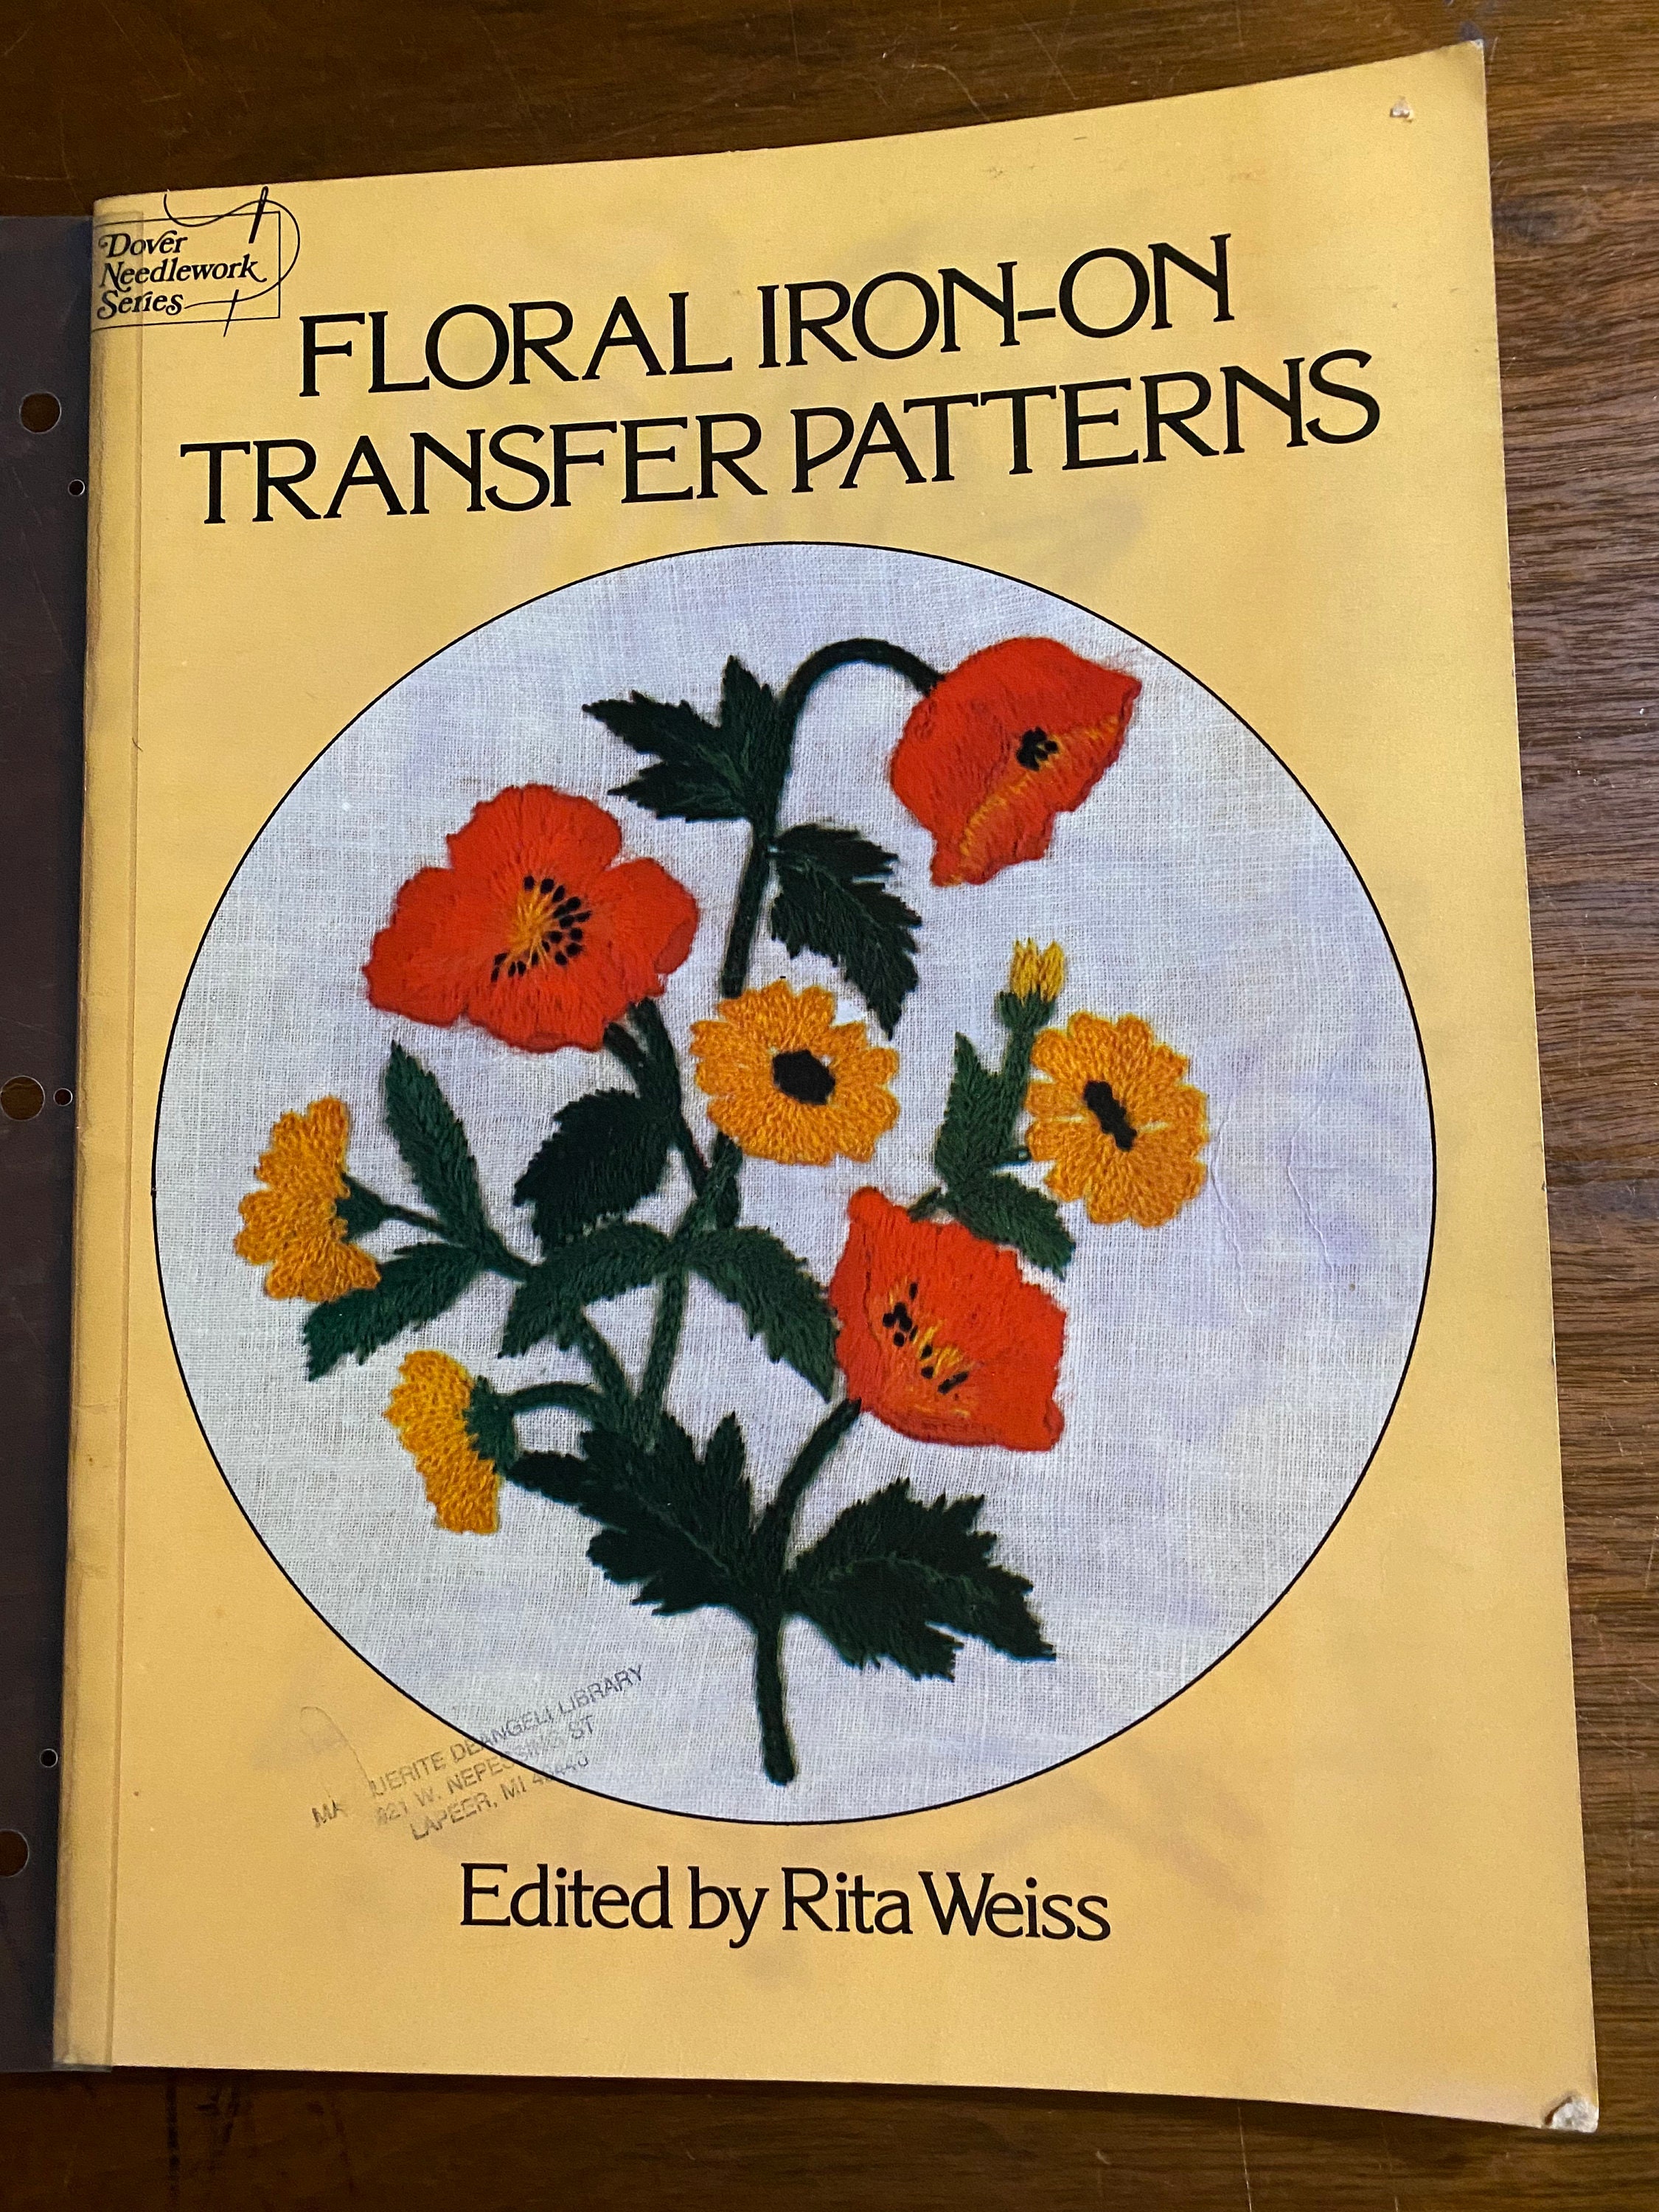 Iron-On Transfer Patterns for Crewel and Embroidery from Early American Sources [Book]